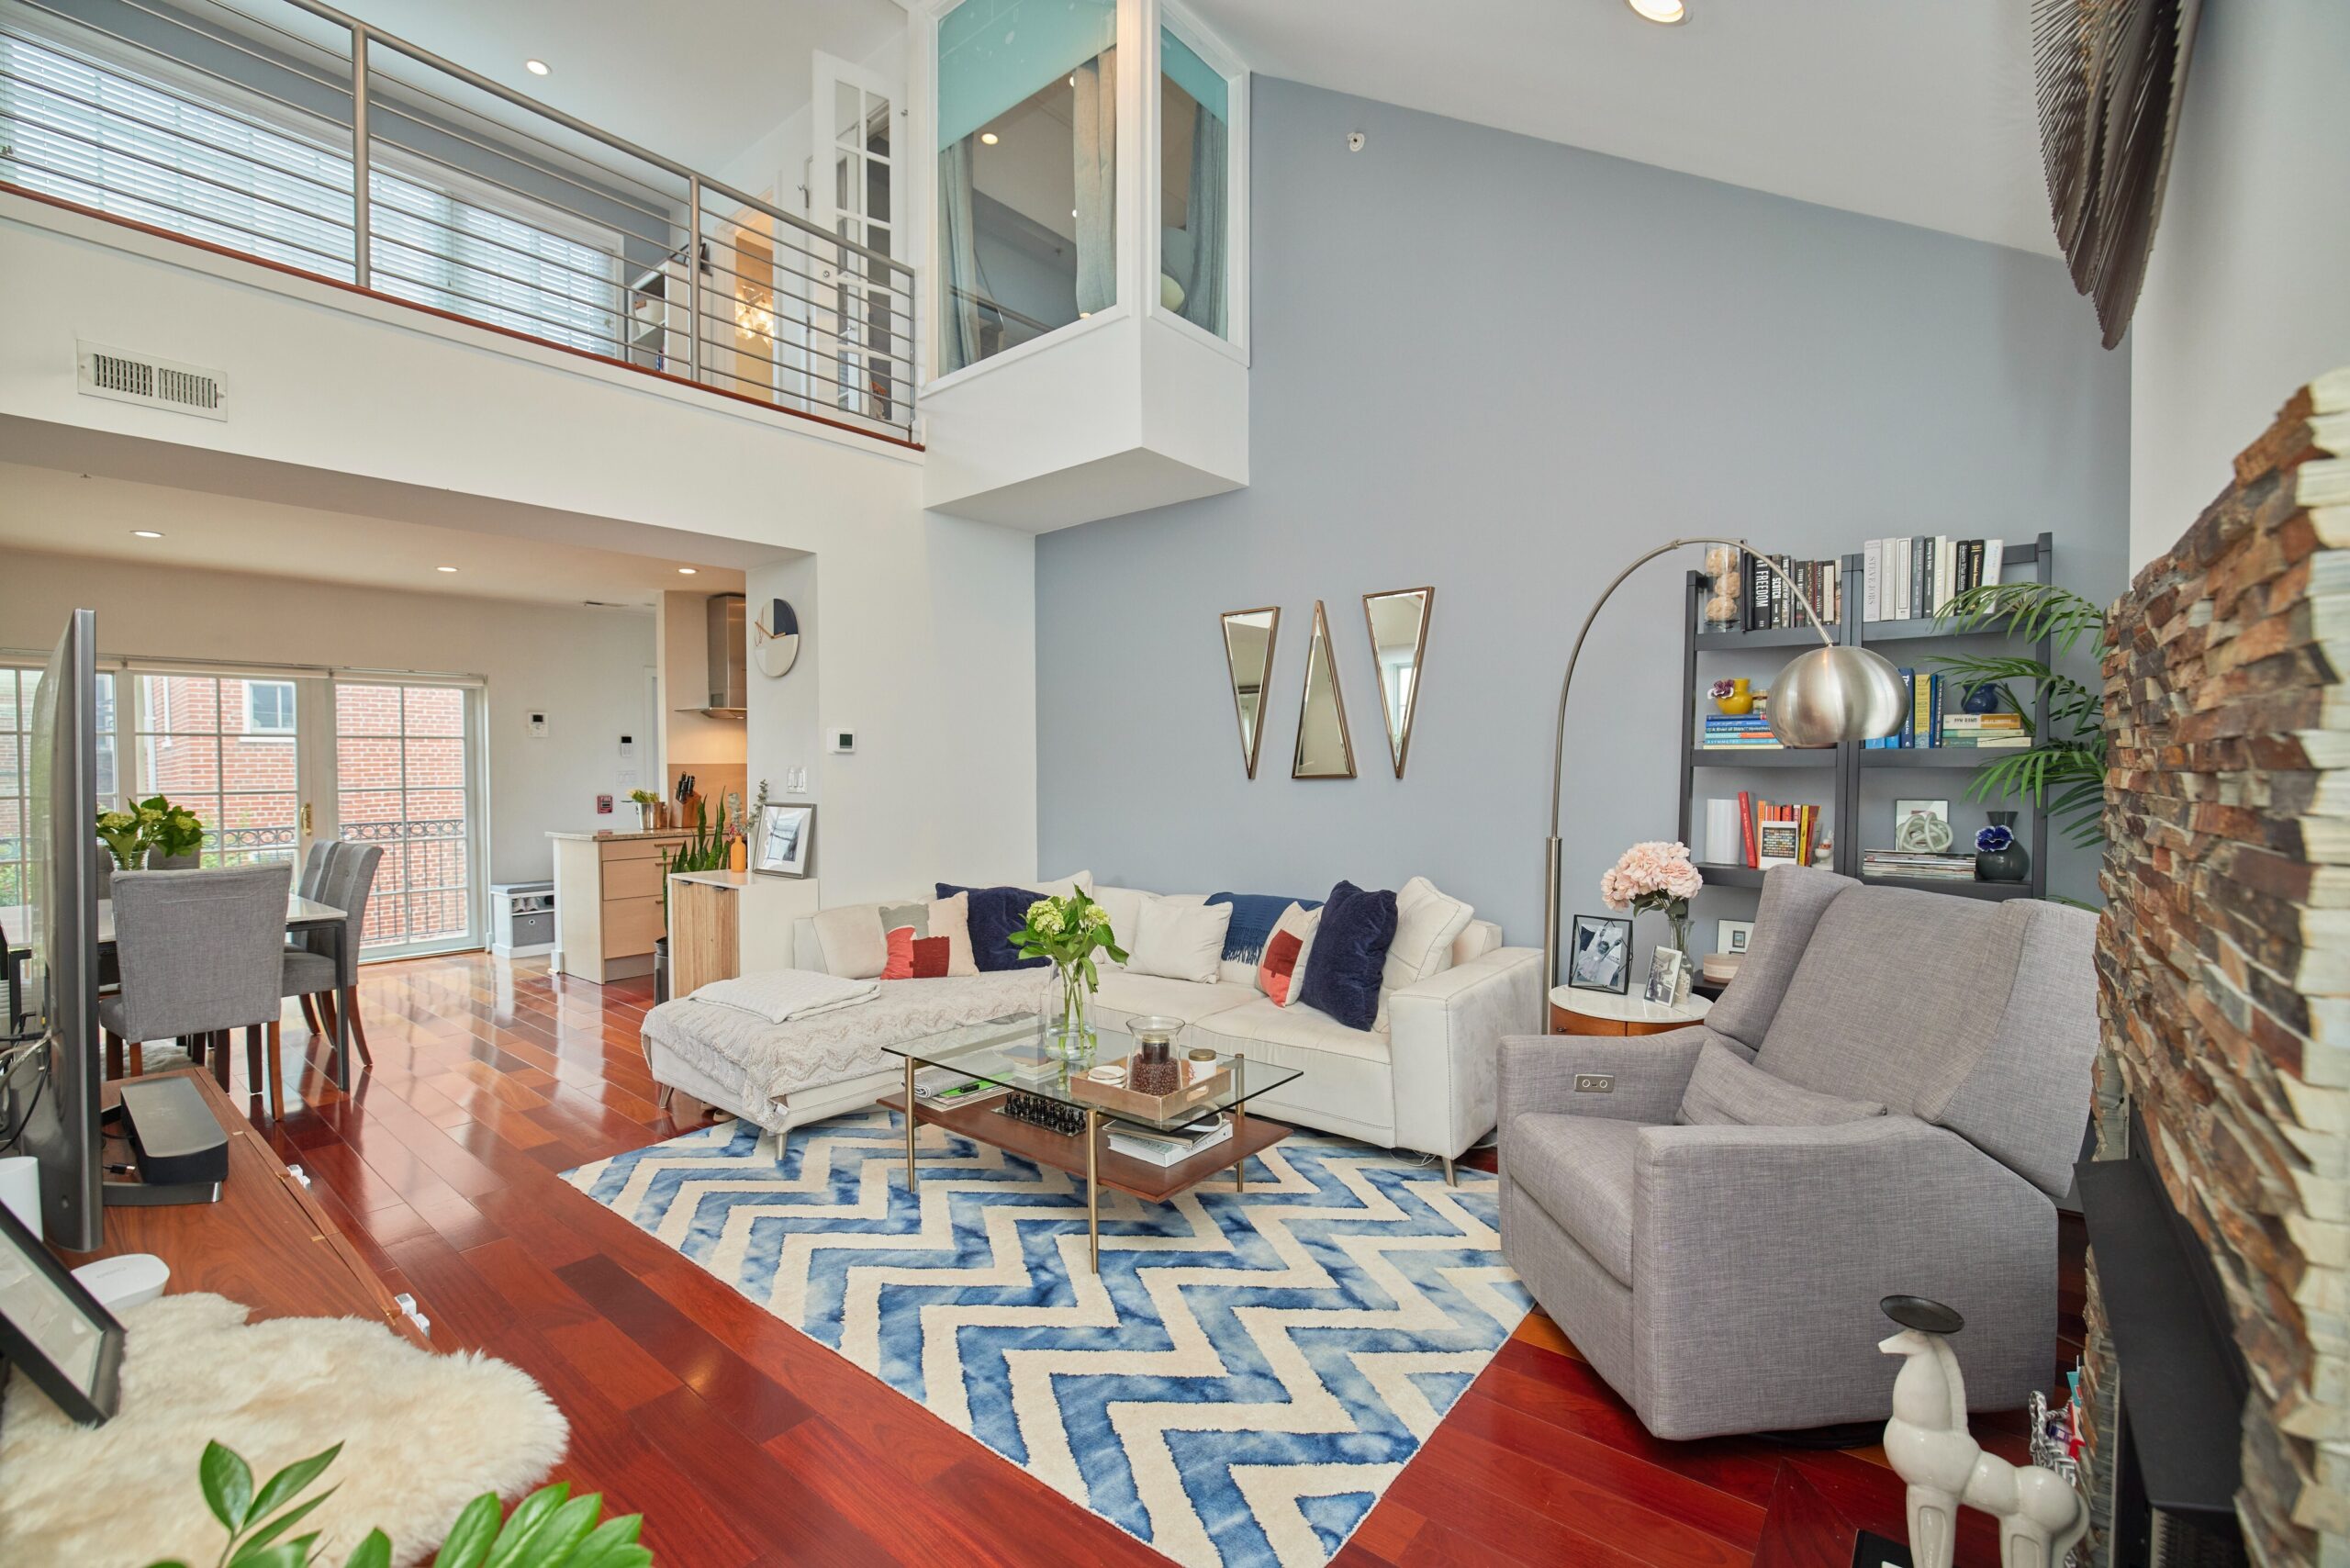 Professional interior photo of 1459 Harvard St NW #6 - showing the living room looking up toward the loft and loft bedroom